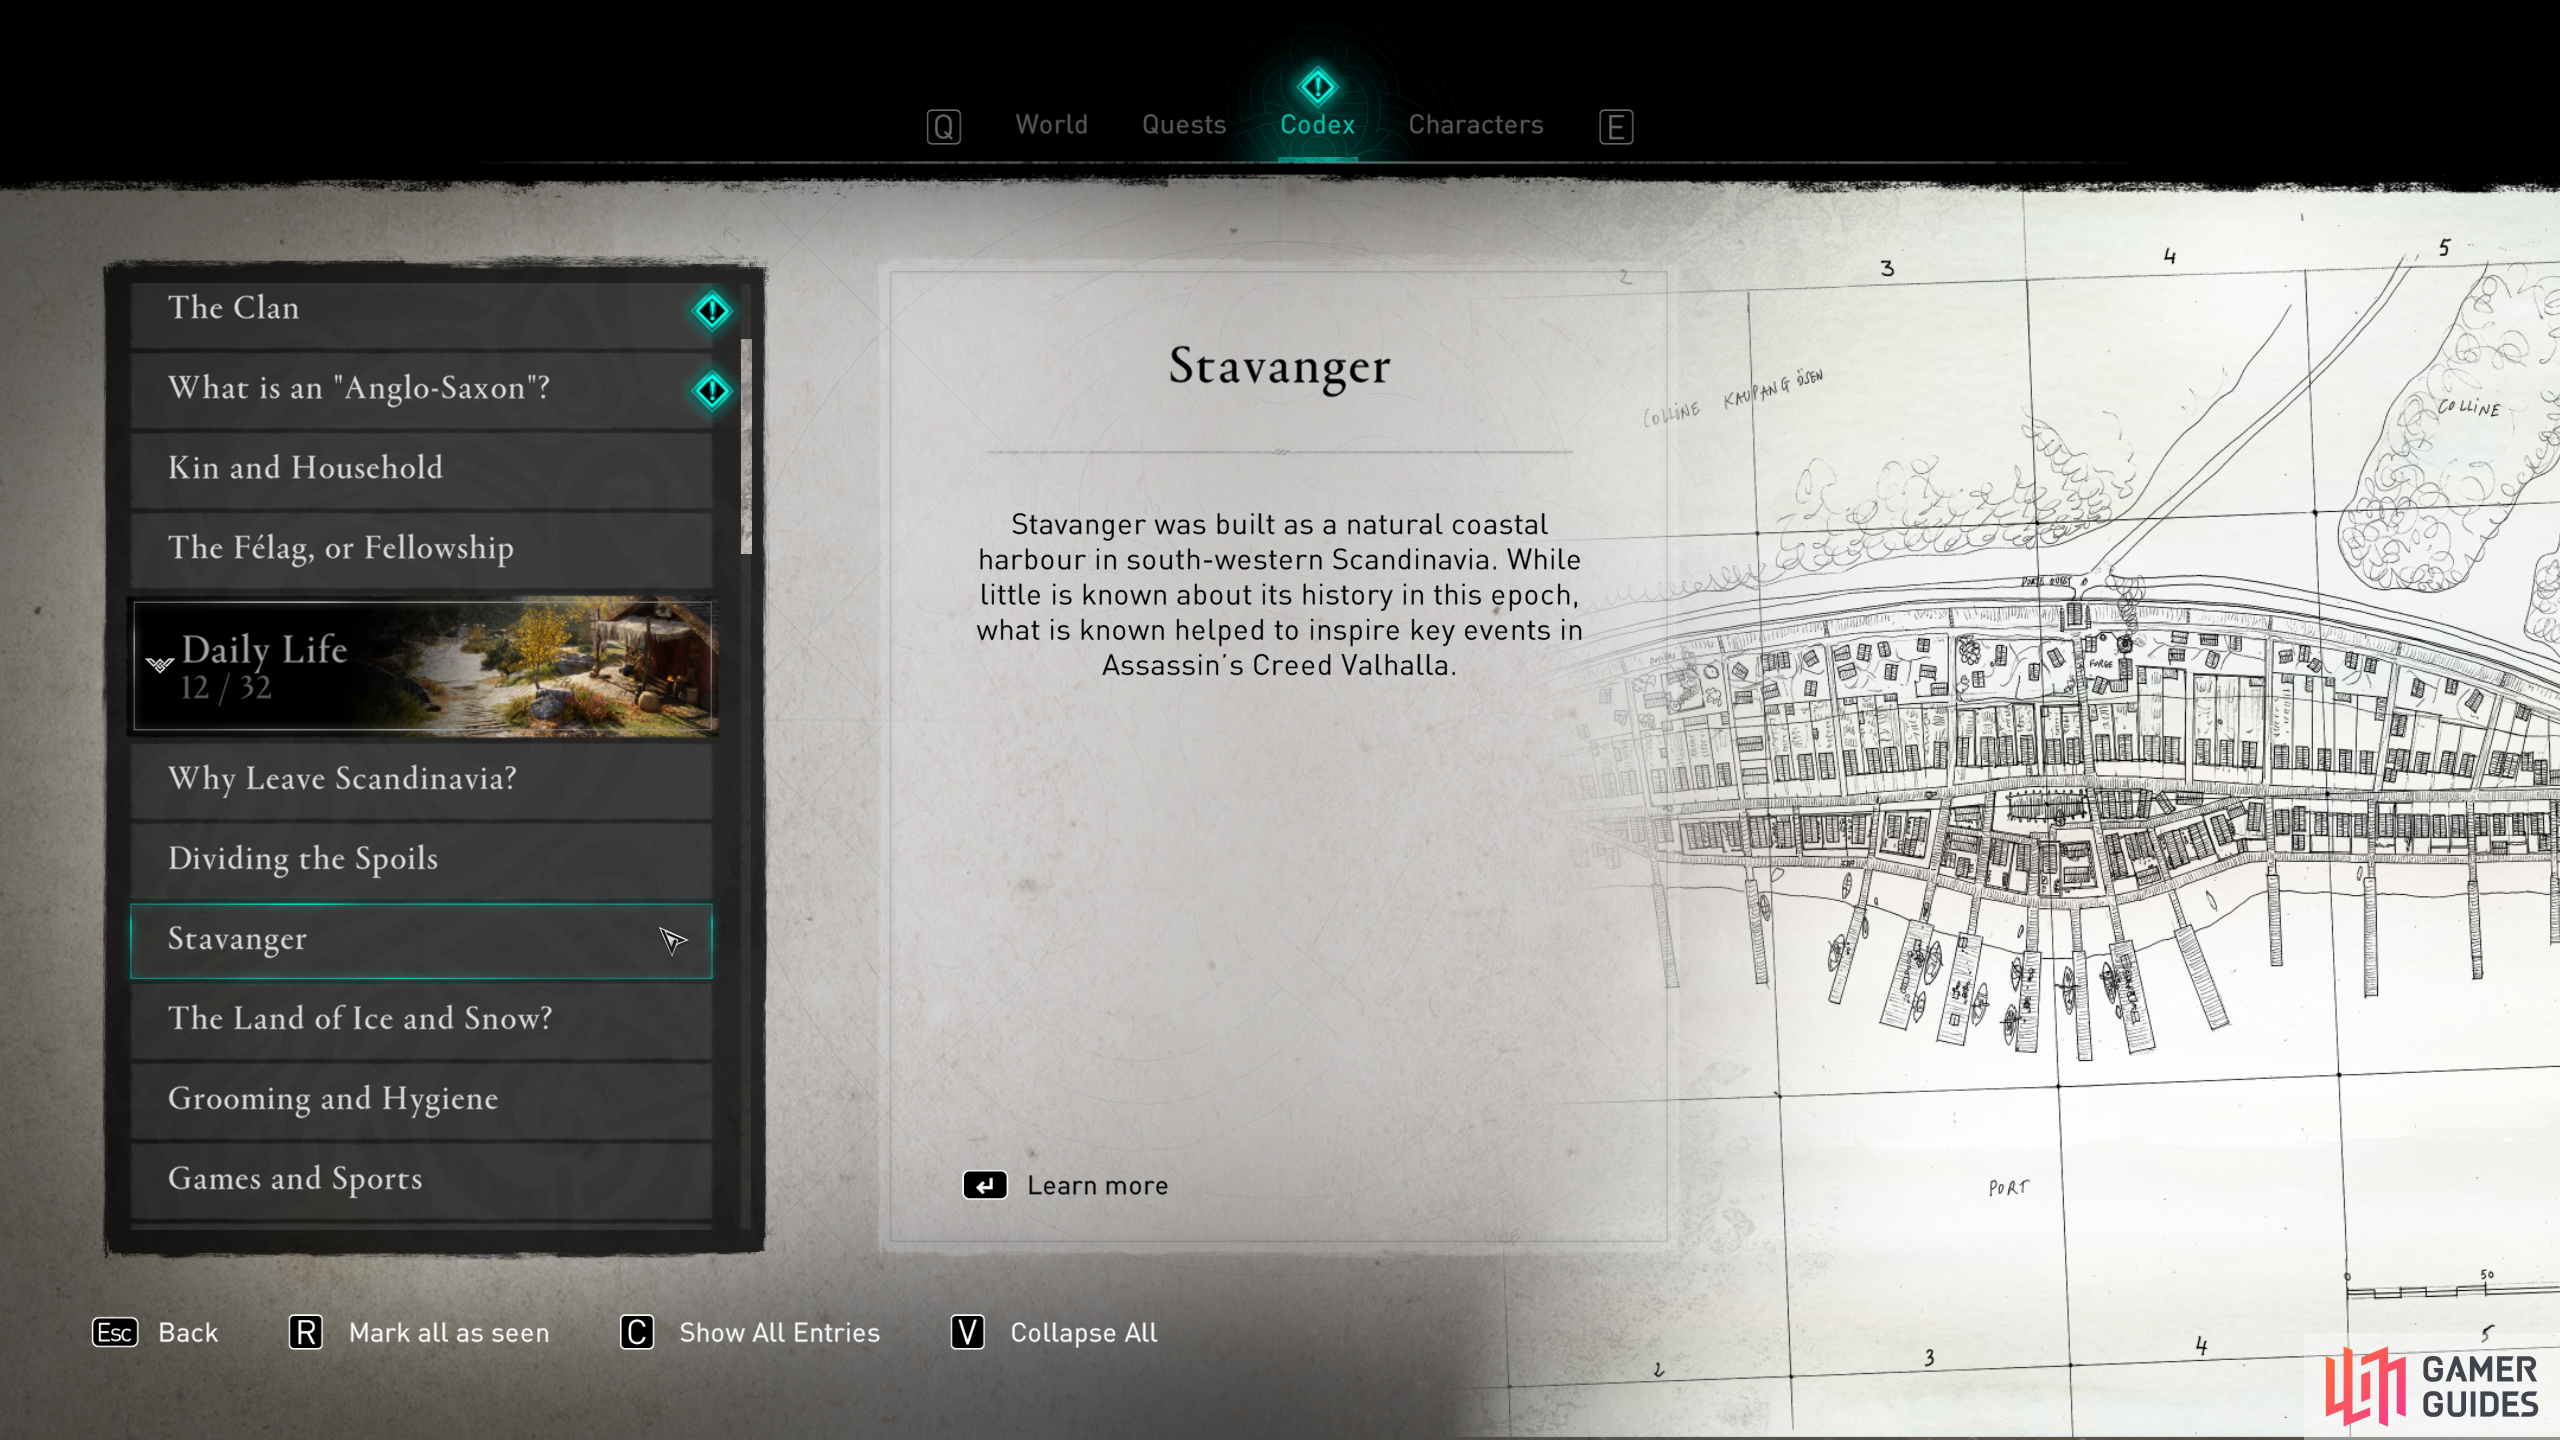 Once you've interacted with a Discovery Site, it will be logged as a Learning in the Codex.